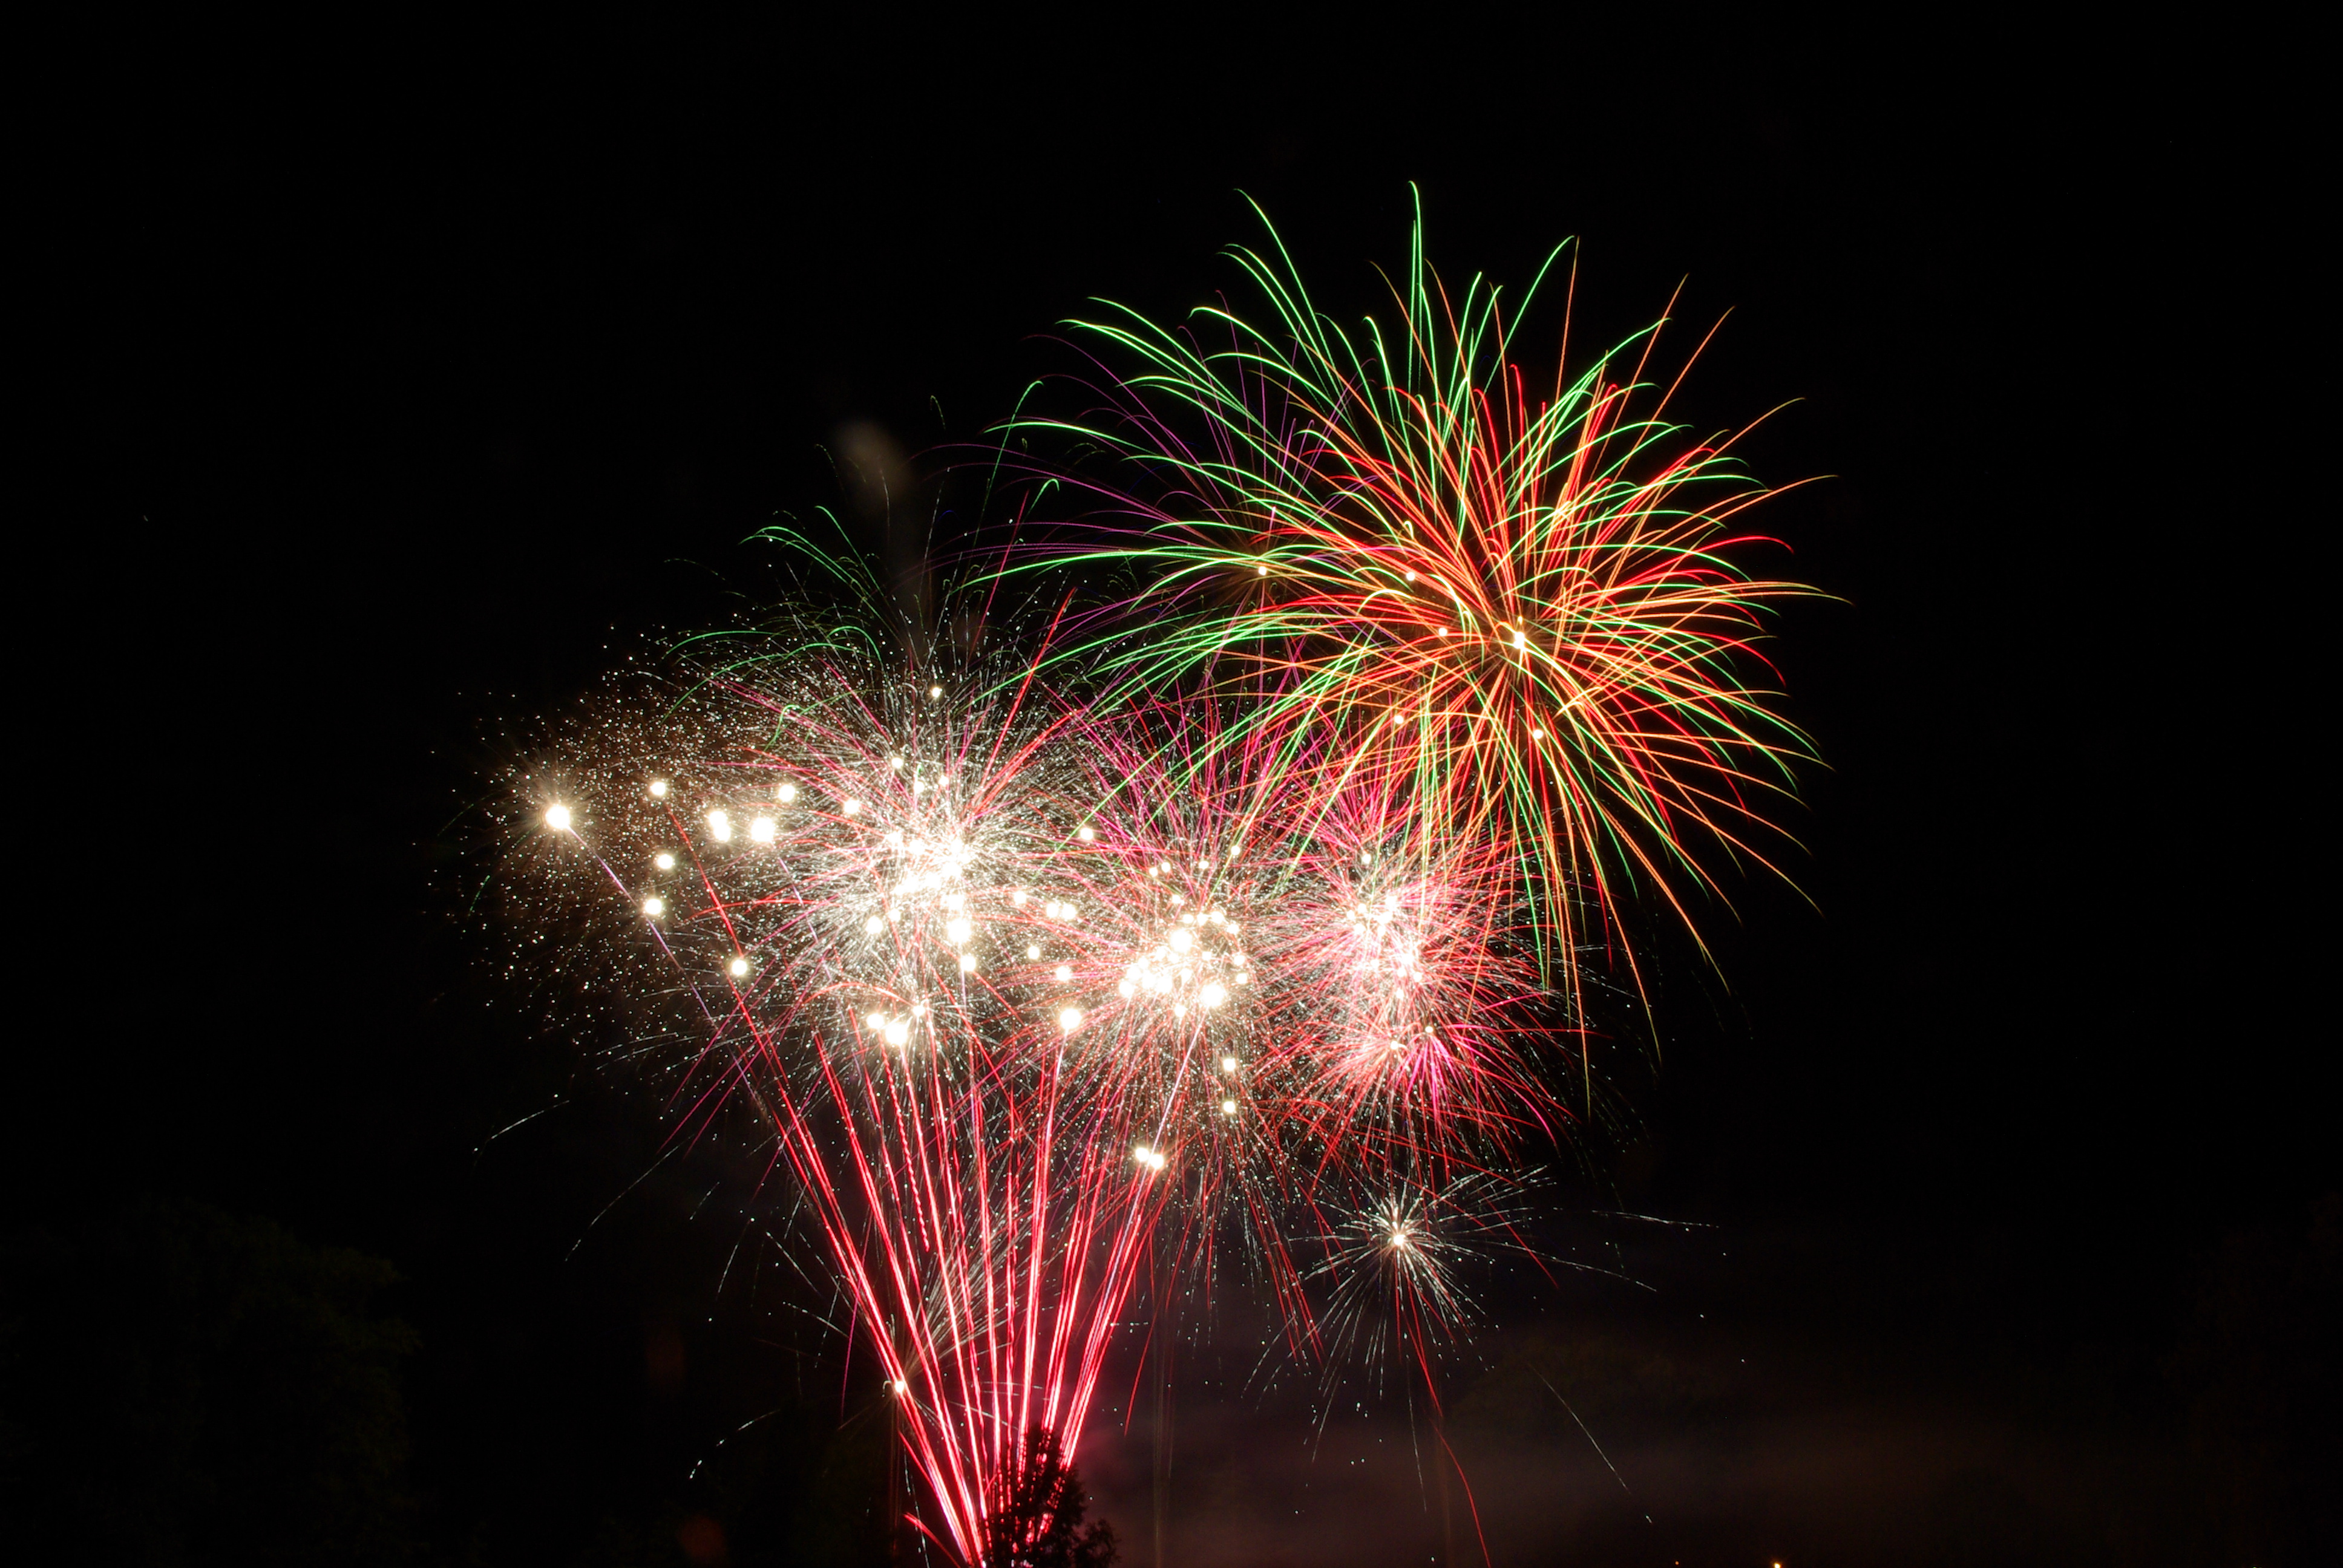 motley, firework, salute, holidays, sparks, multicolored, holiday, fireworks